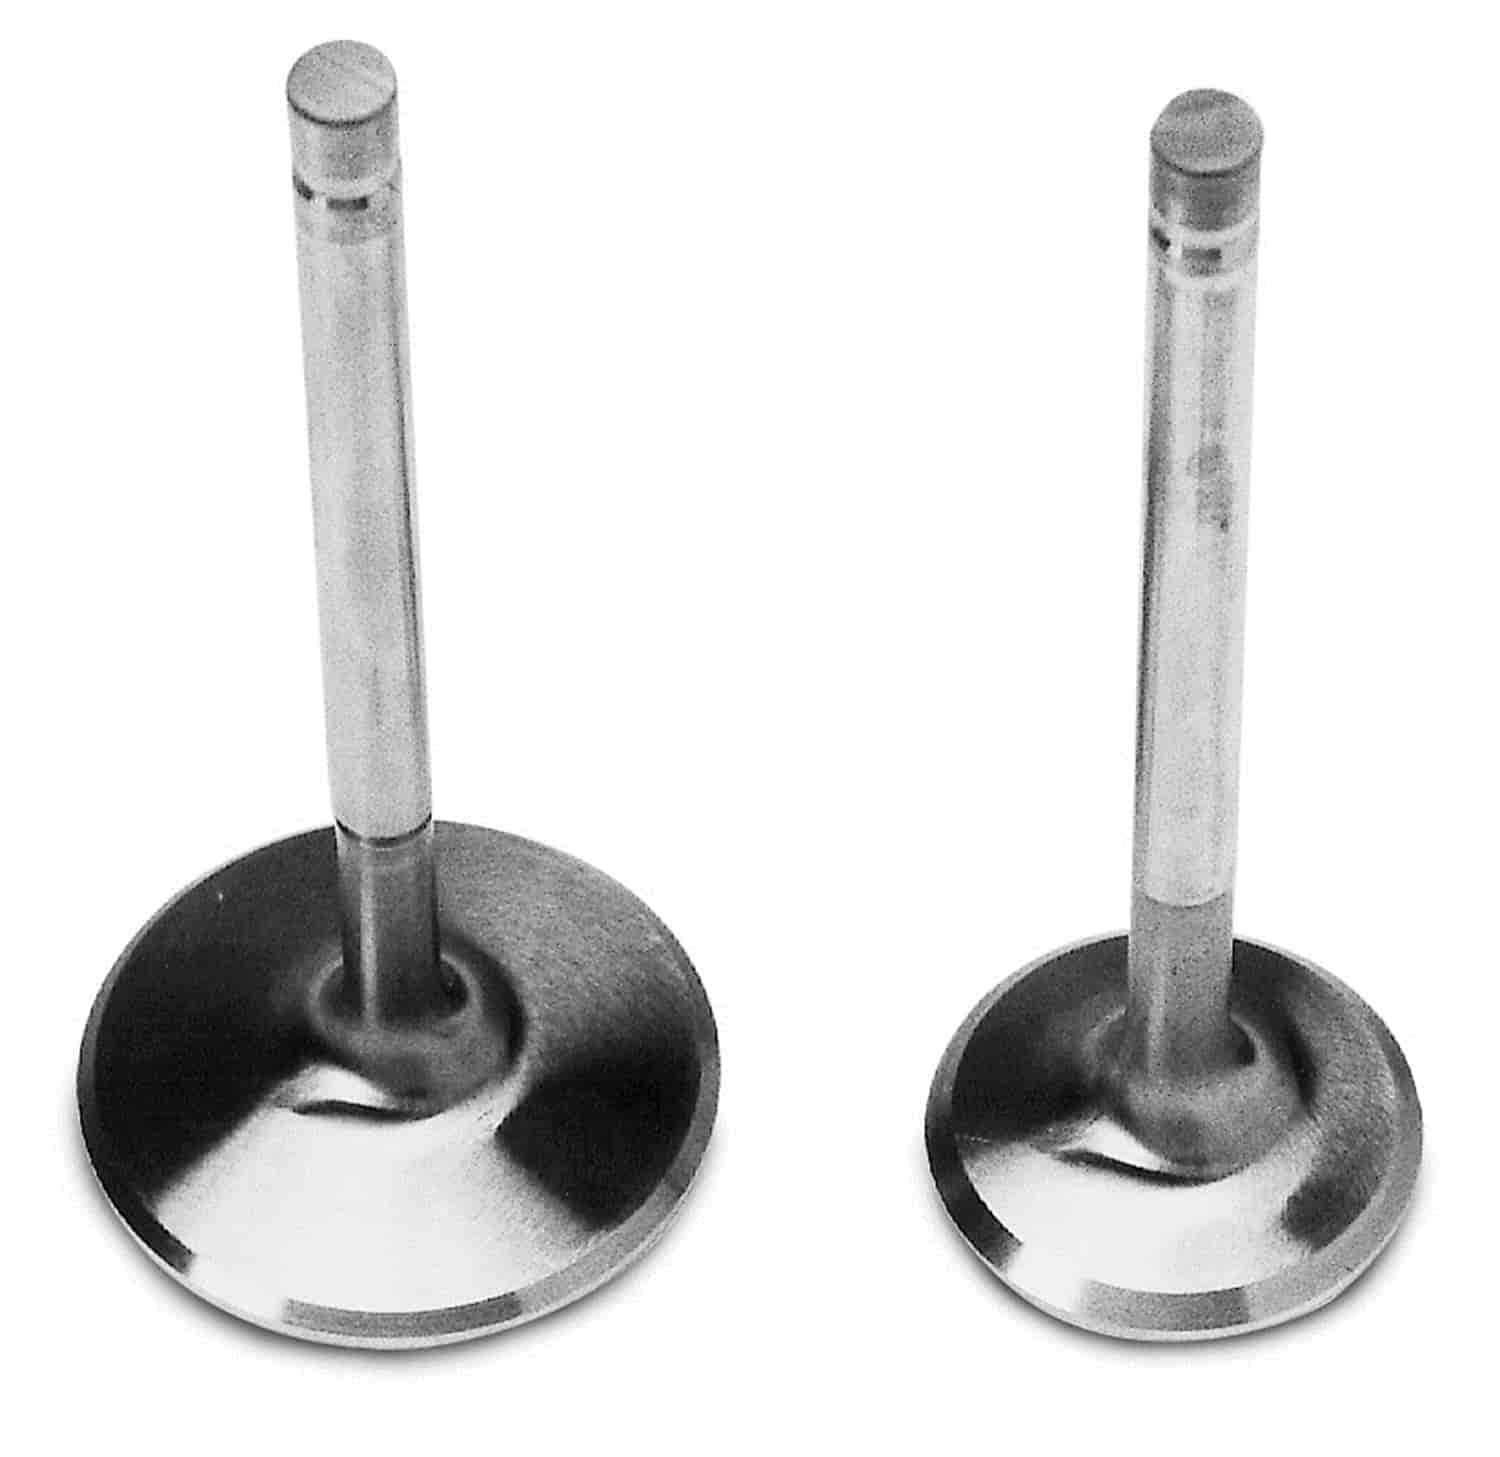 Exhaust Valve Set 1.88" for Big Block Chevy Performer RPM Heads #350-60459, 350-60479, 350-60499, & 350-60559